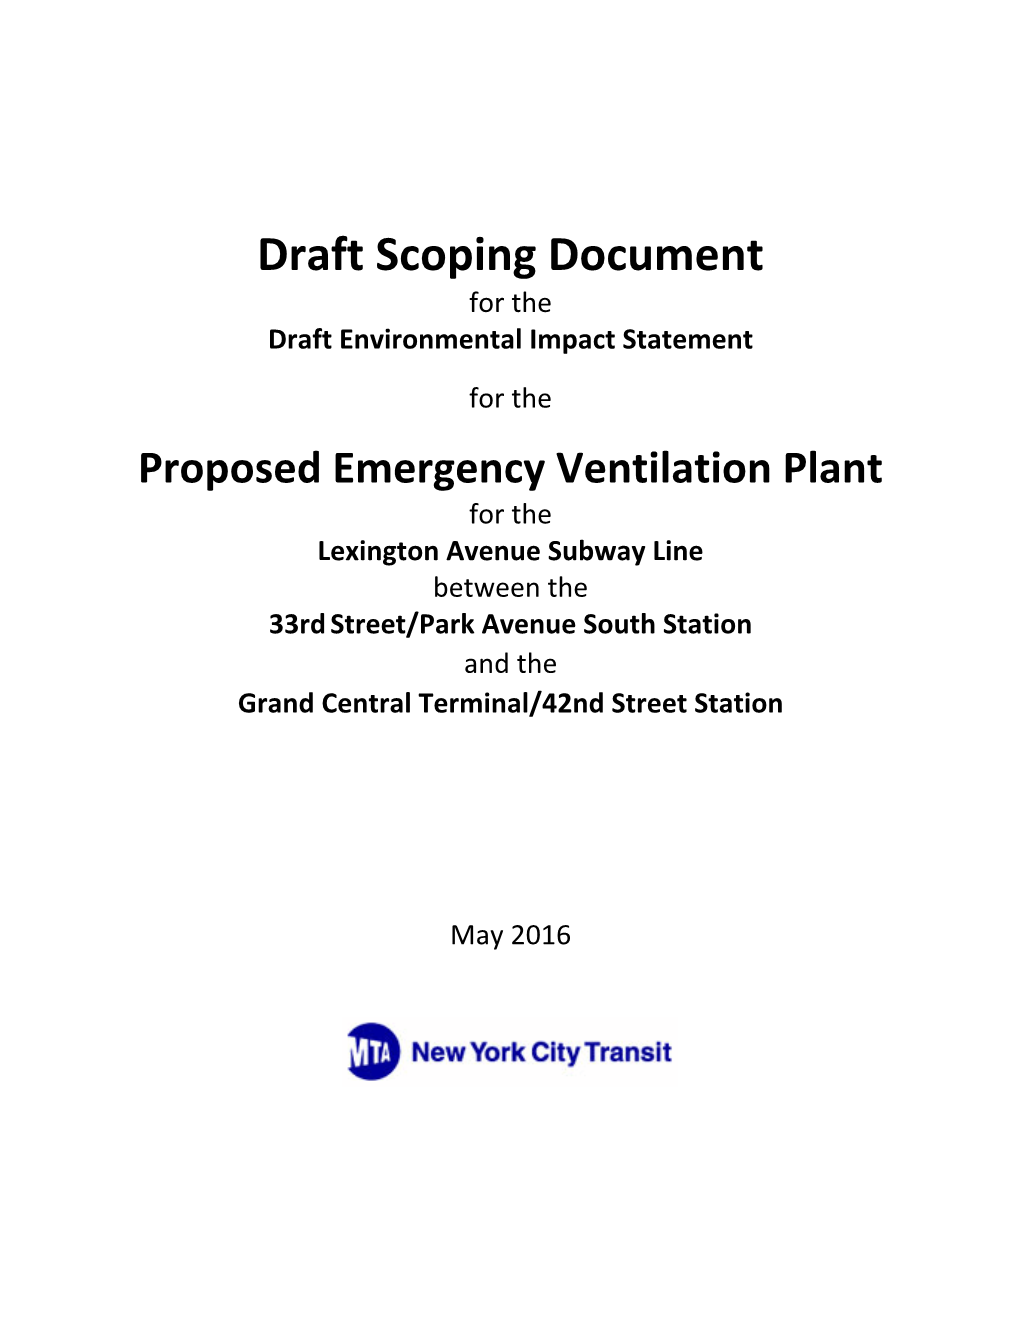 Draft Scoping Document for the Draft Environmental Impact Statement